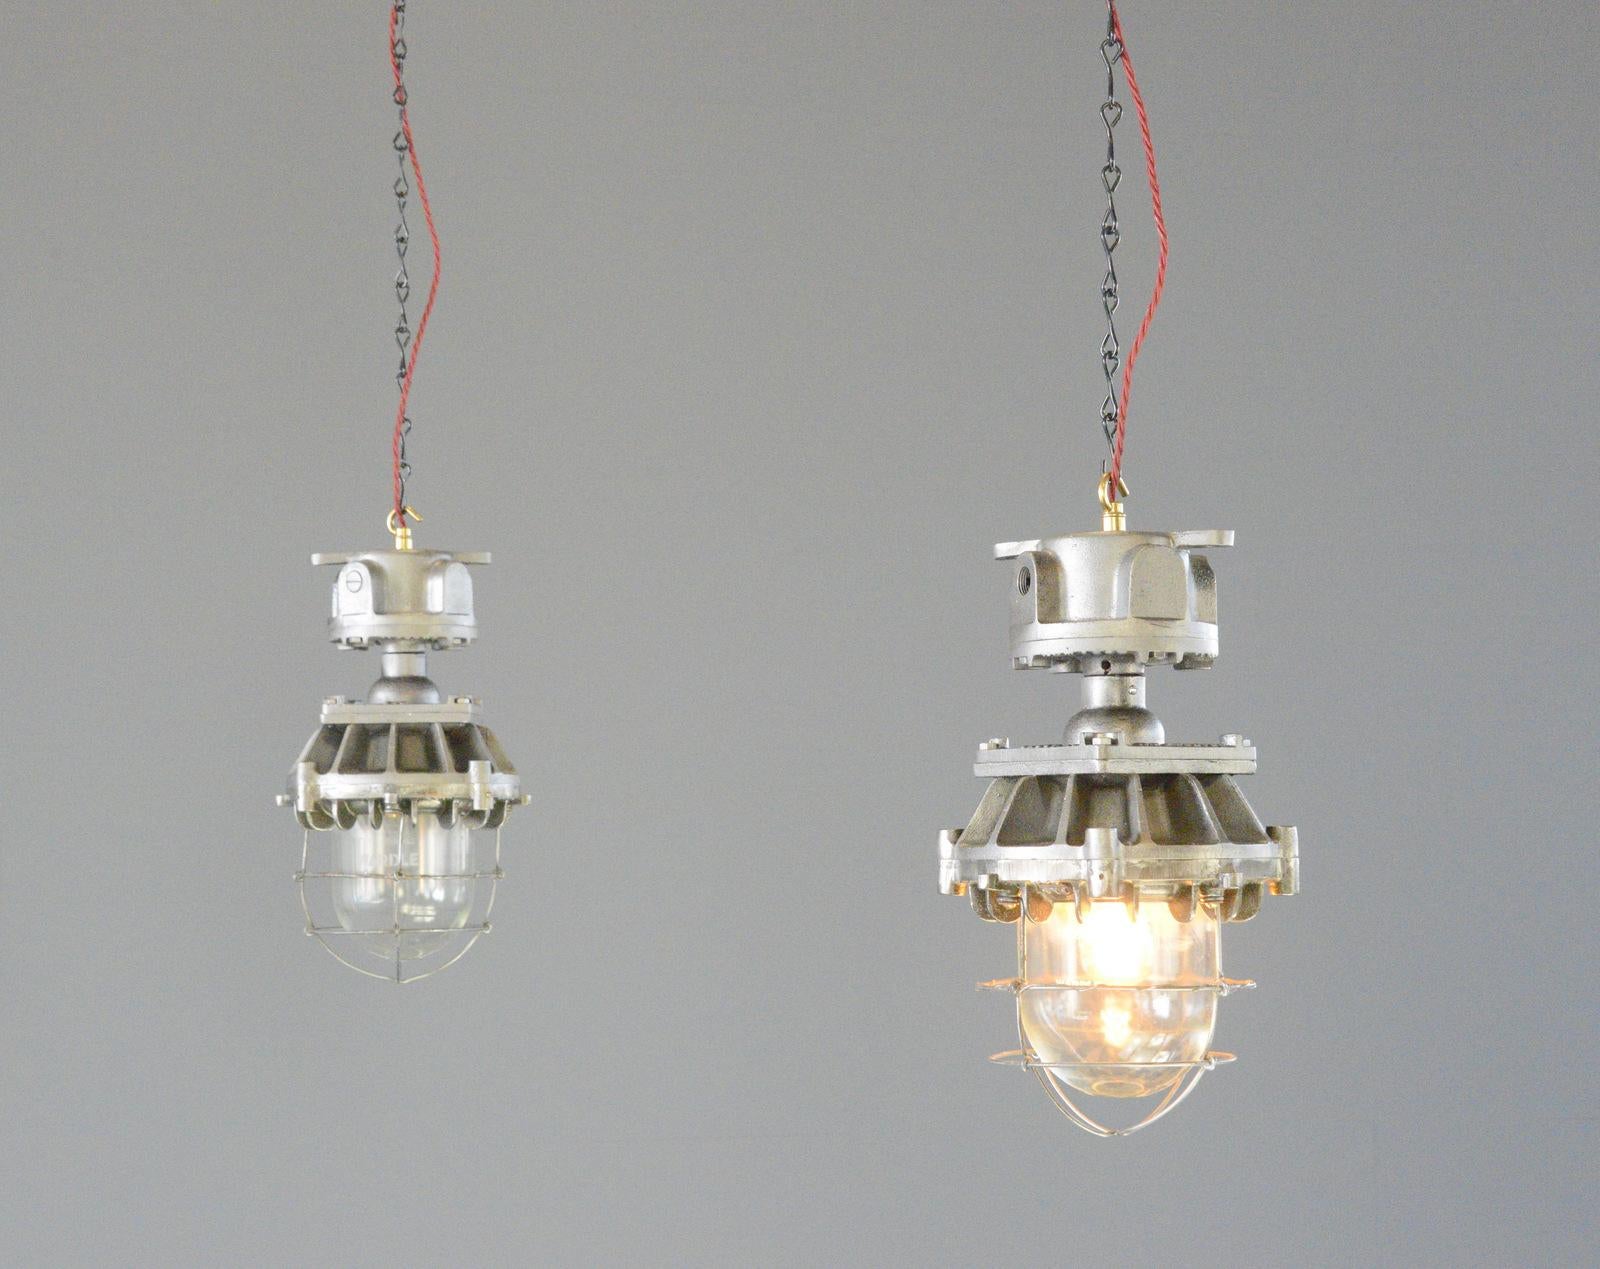 Explosion Proof Pendant Lights By Wardle circa 1930s

- Cast iron with steel cages
- Flame prood glass with 